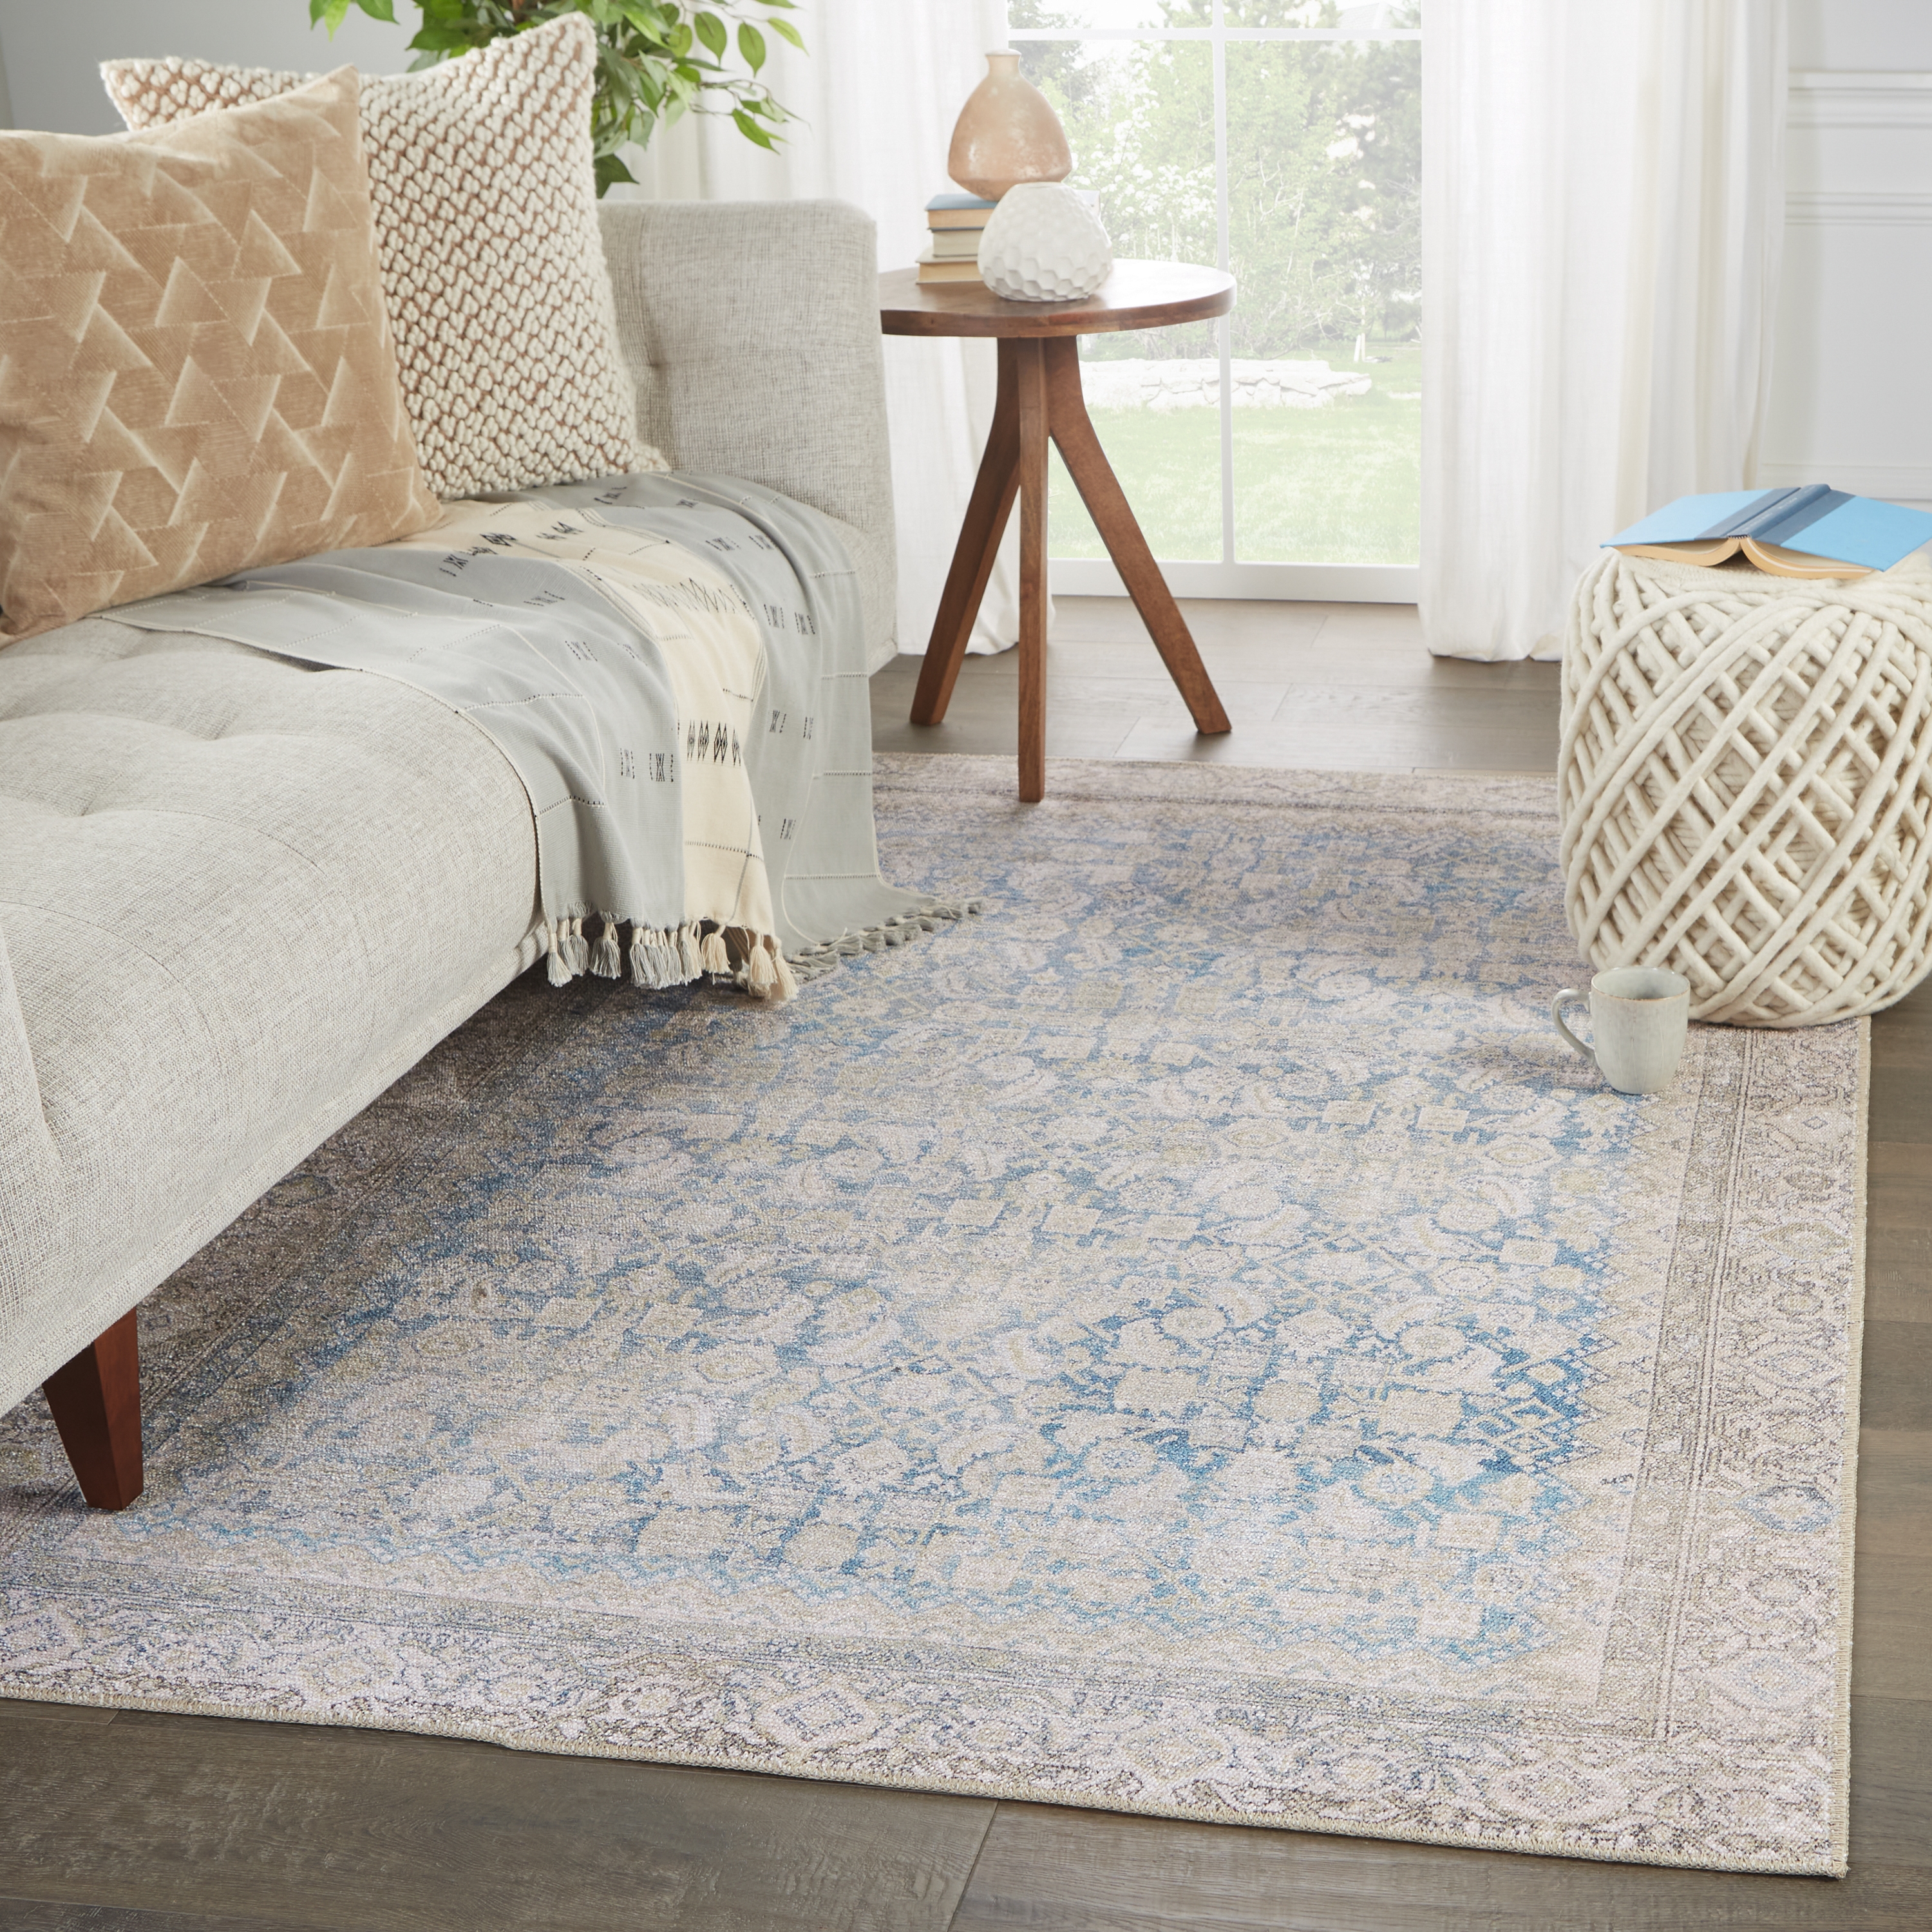 Vibe by Royse Oriental Blue/ Gray Area Rug (5'X7'6") - Image 4